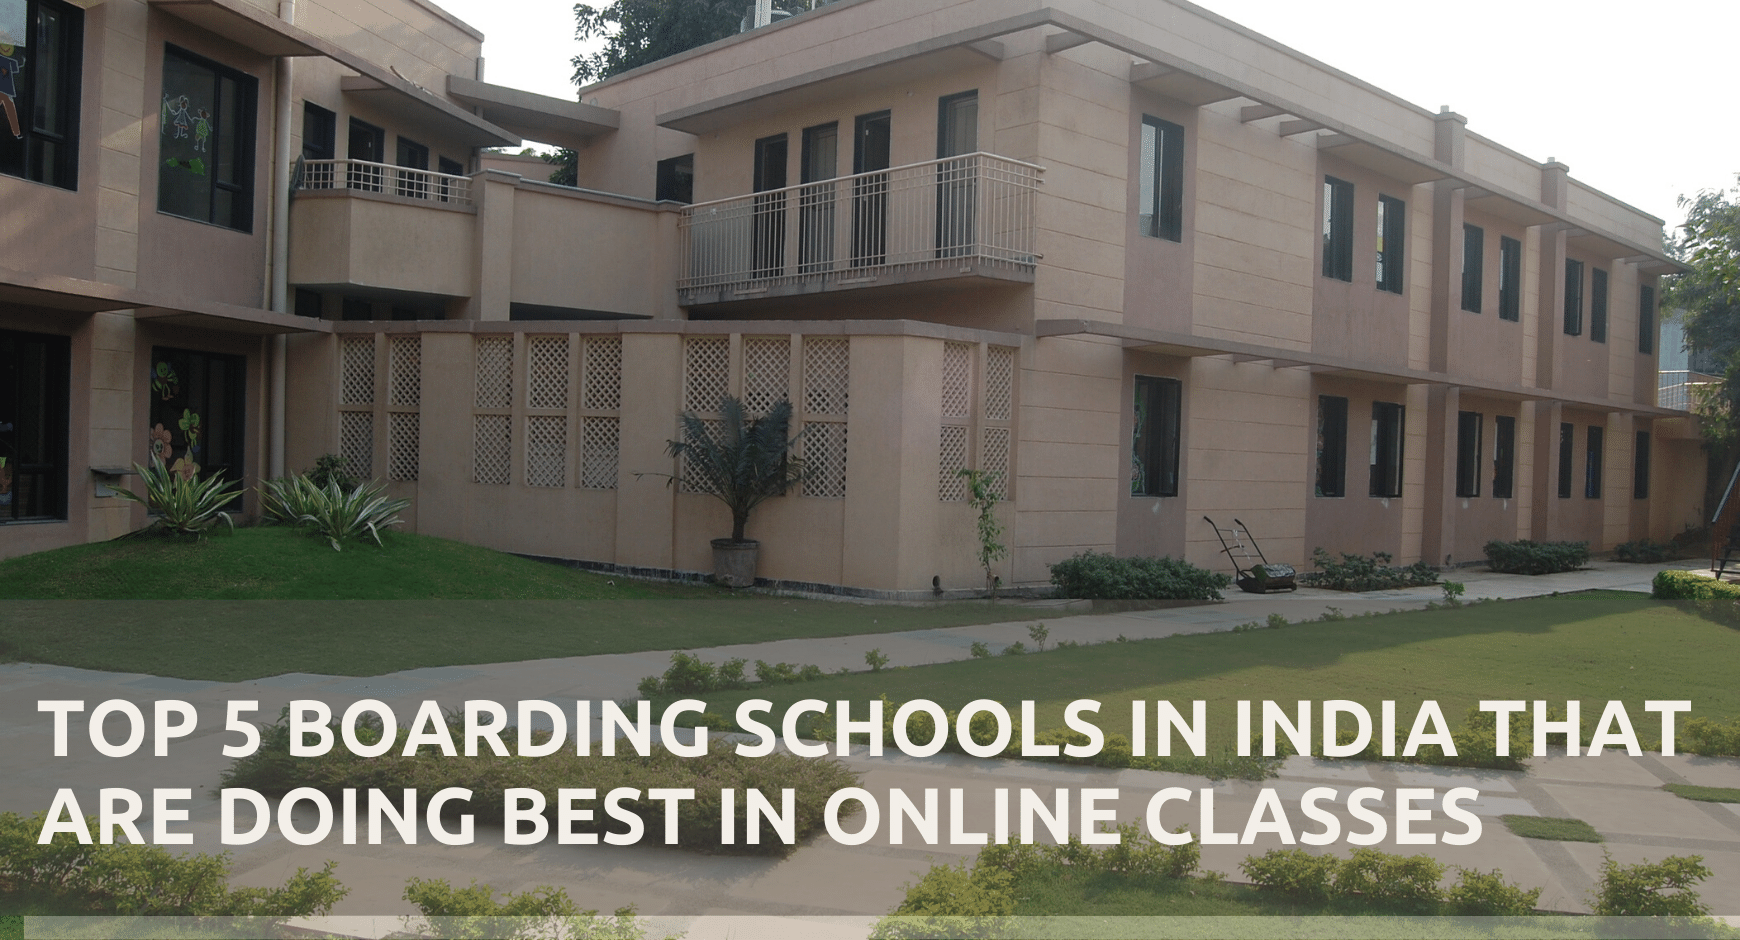 Top 5 boarding schools in India that are doing best in online classes